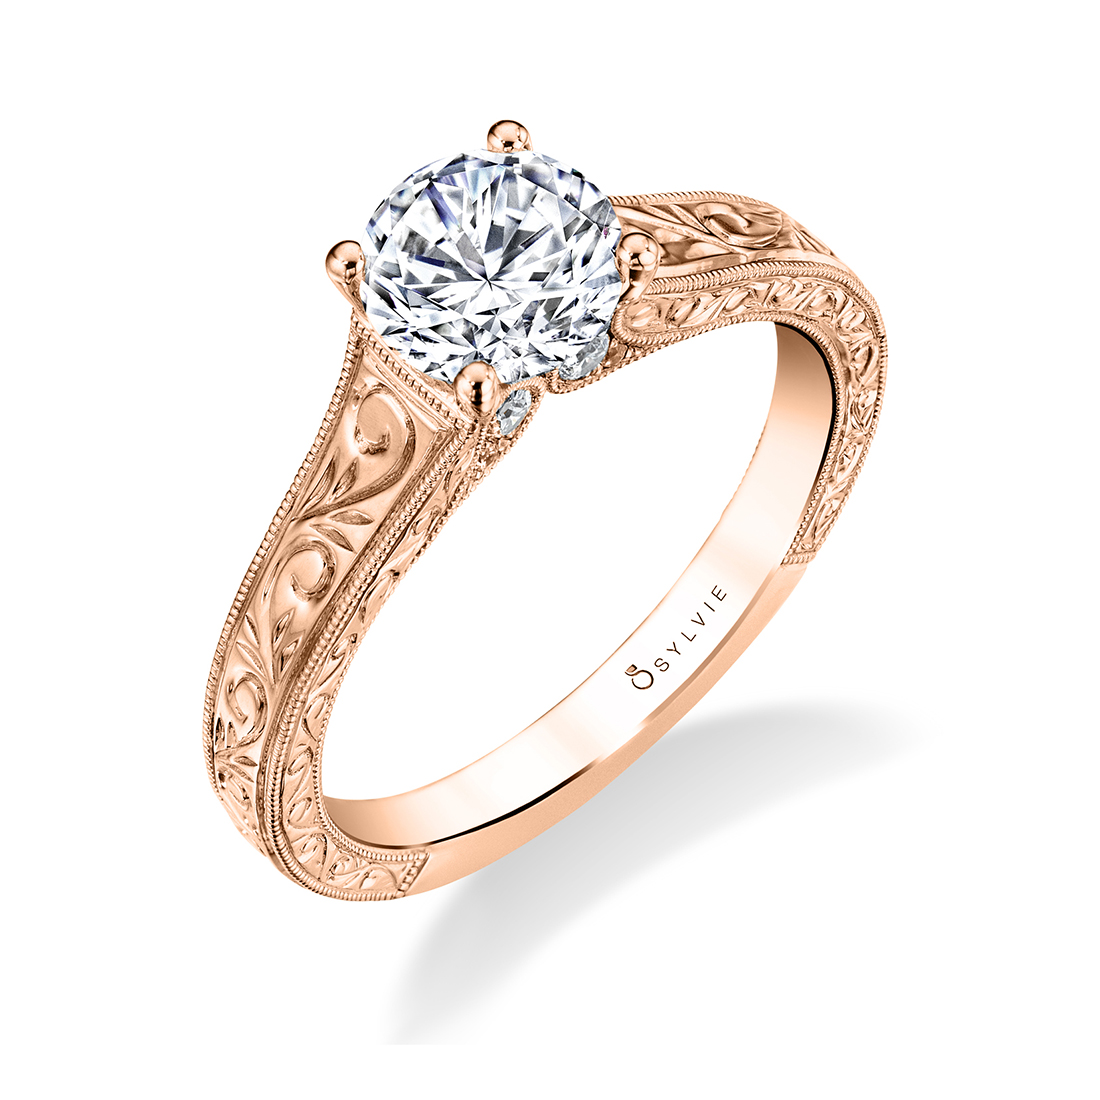 Hand Engraved Engagement Ring in Rose Gold